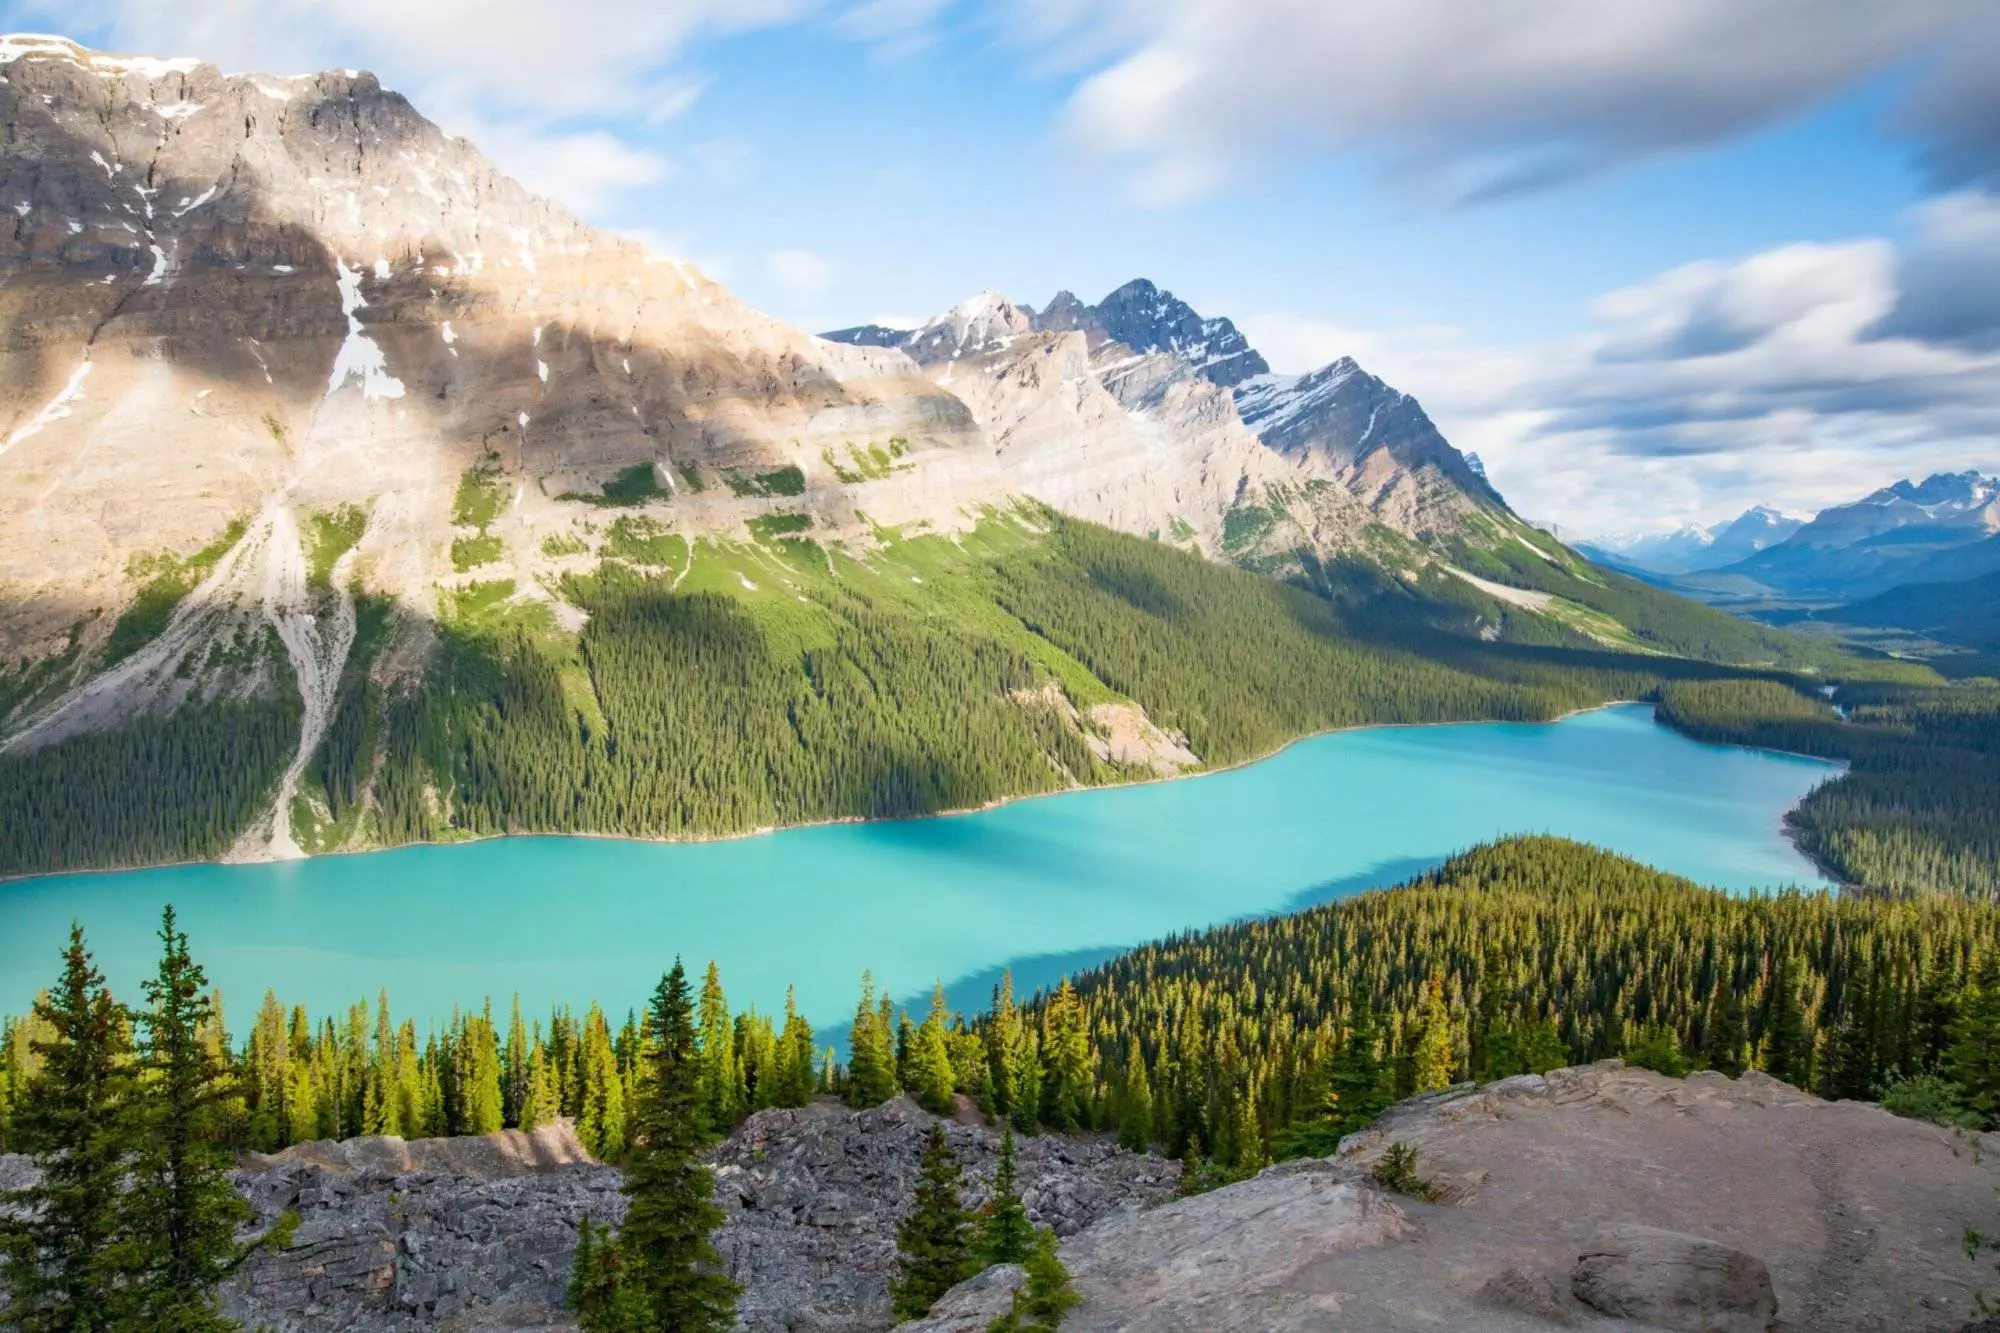 A scenic view of the Peyto lake and mountains in the background.